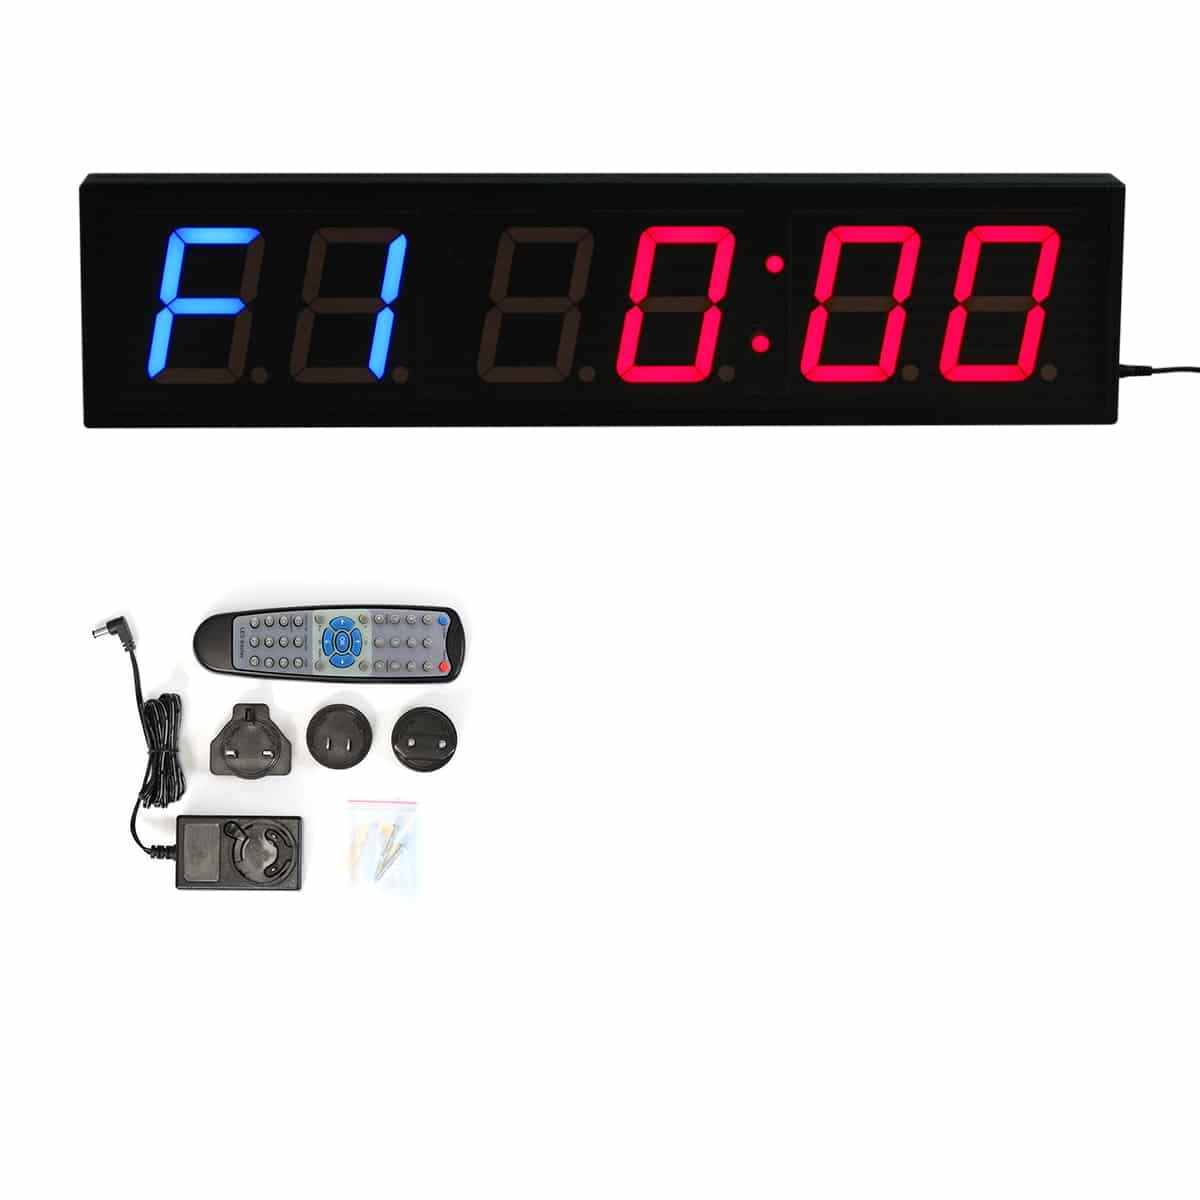 Digital Interval Wall Timer for Gyms, Sports Clubs, Schools, Crossfit (6  Digit)